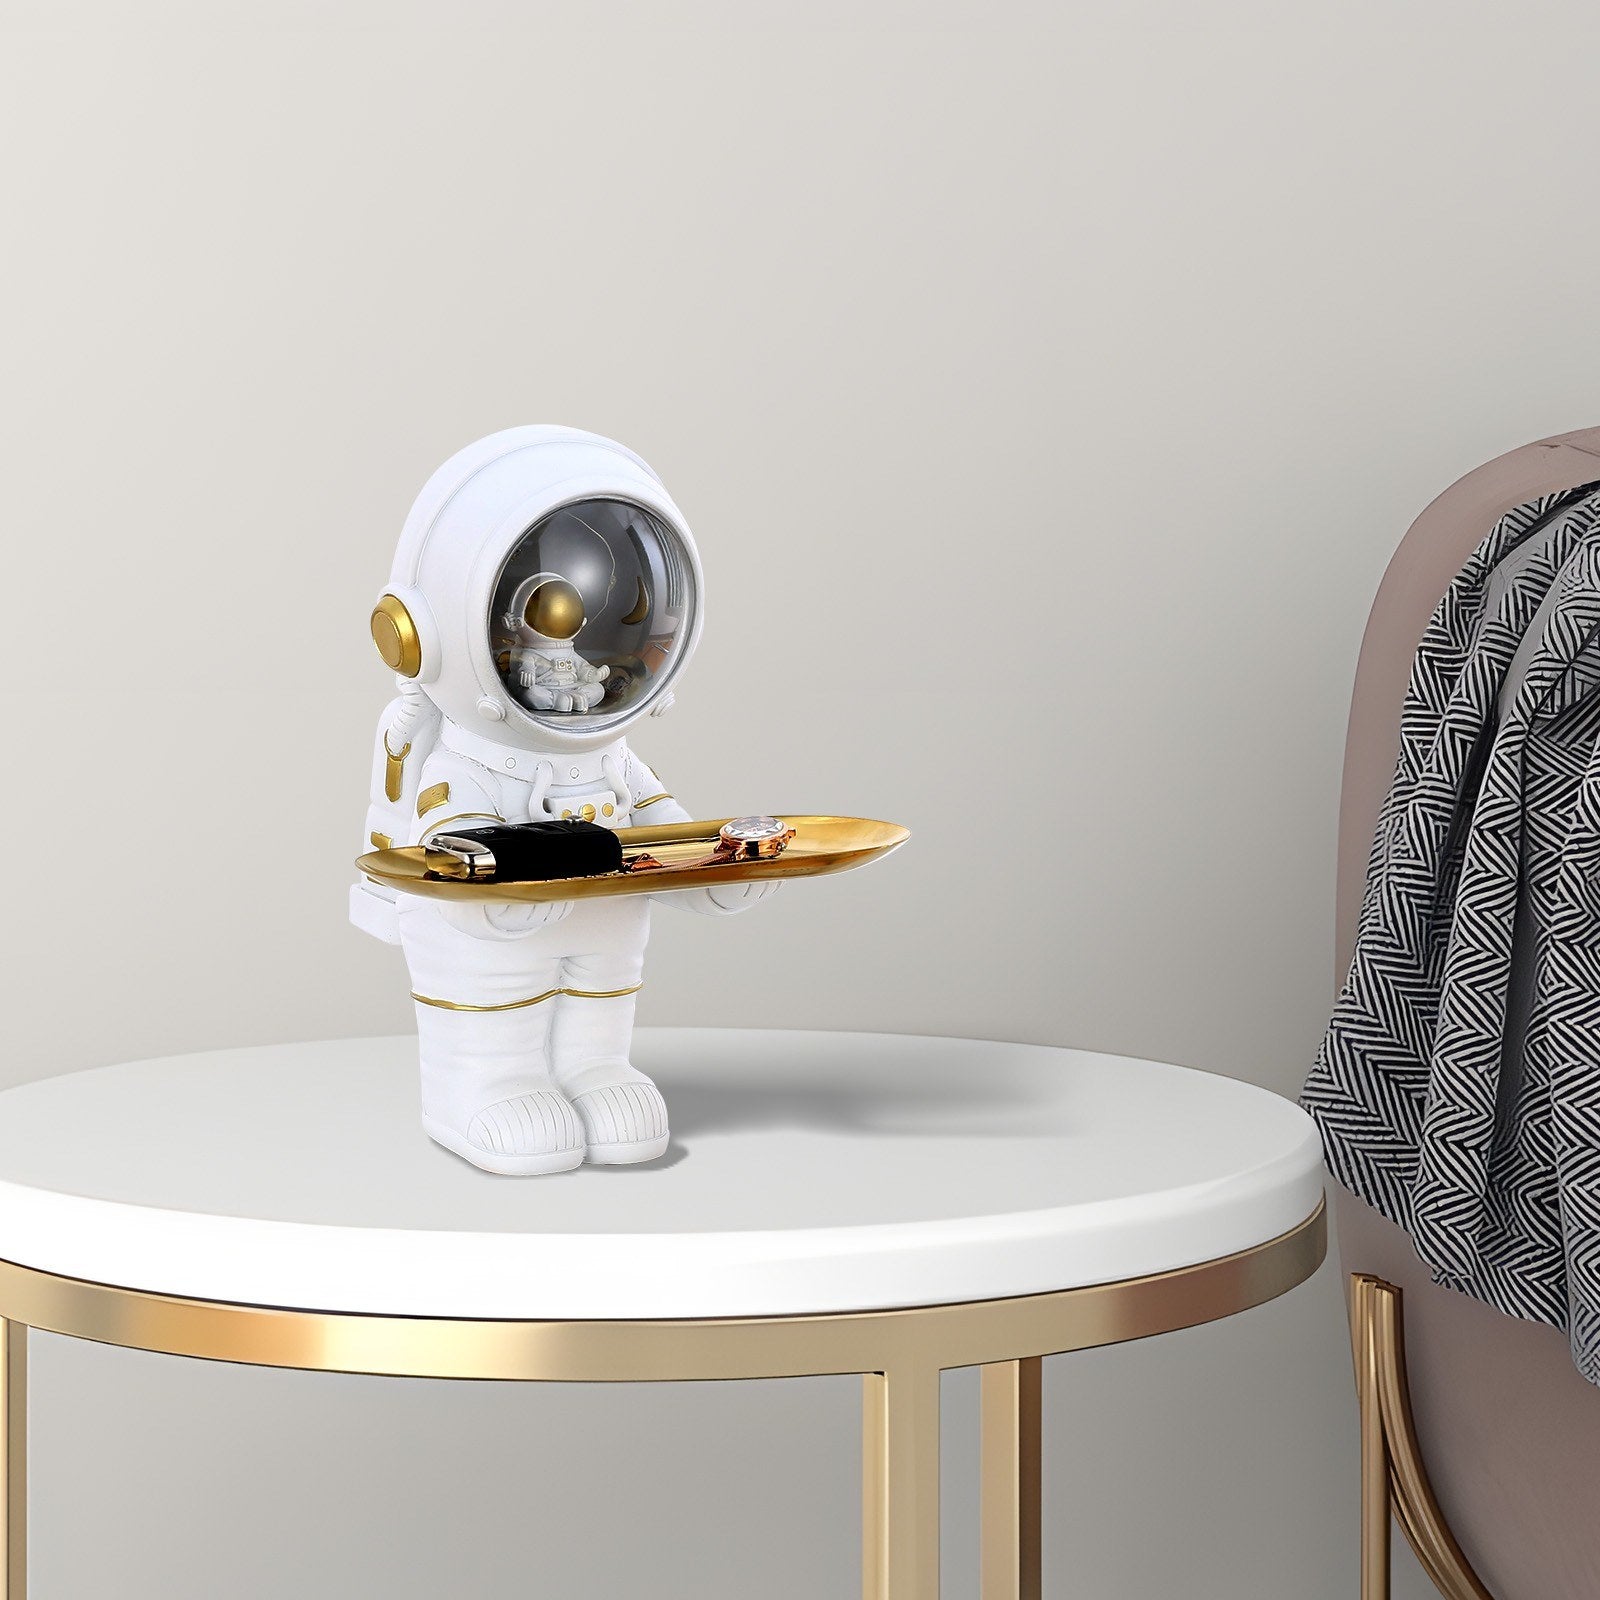 A perfect gift for a space-loving kid or a grownup with a lot of imagination, our stylish astronaut figurine is the perfect way to inspire you on your journey through space